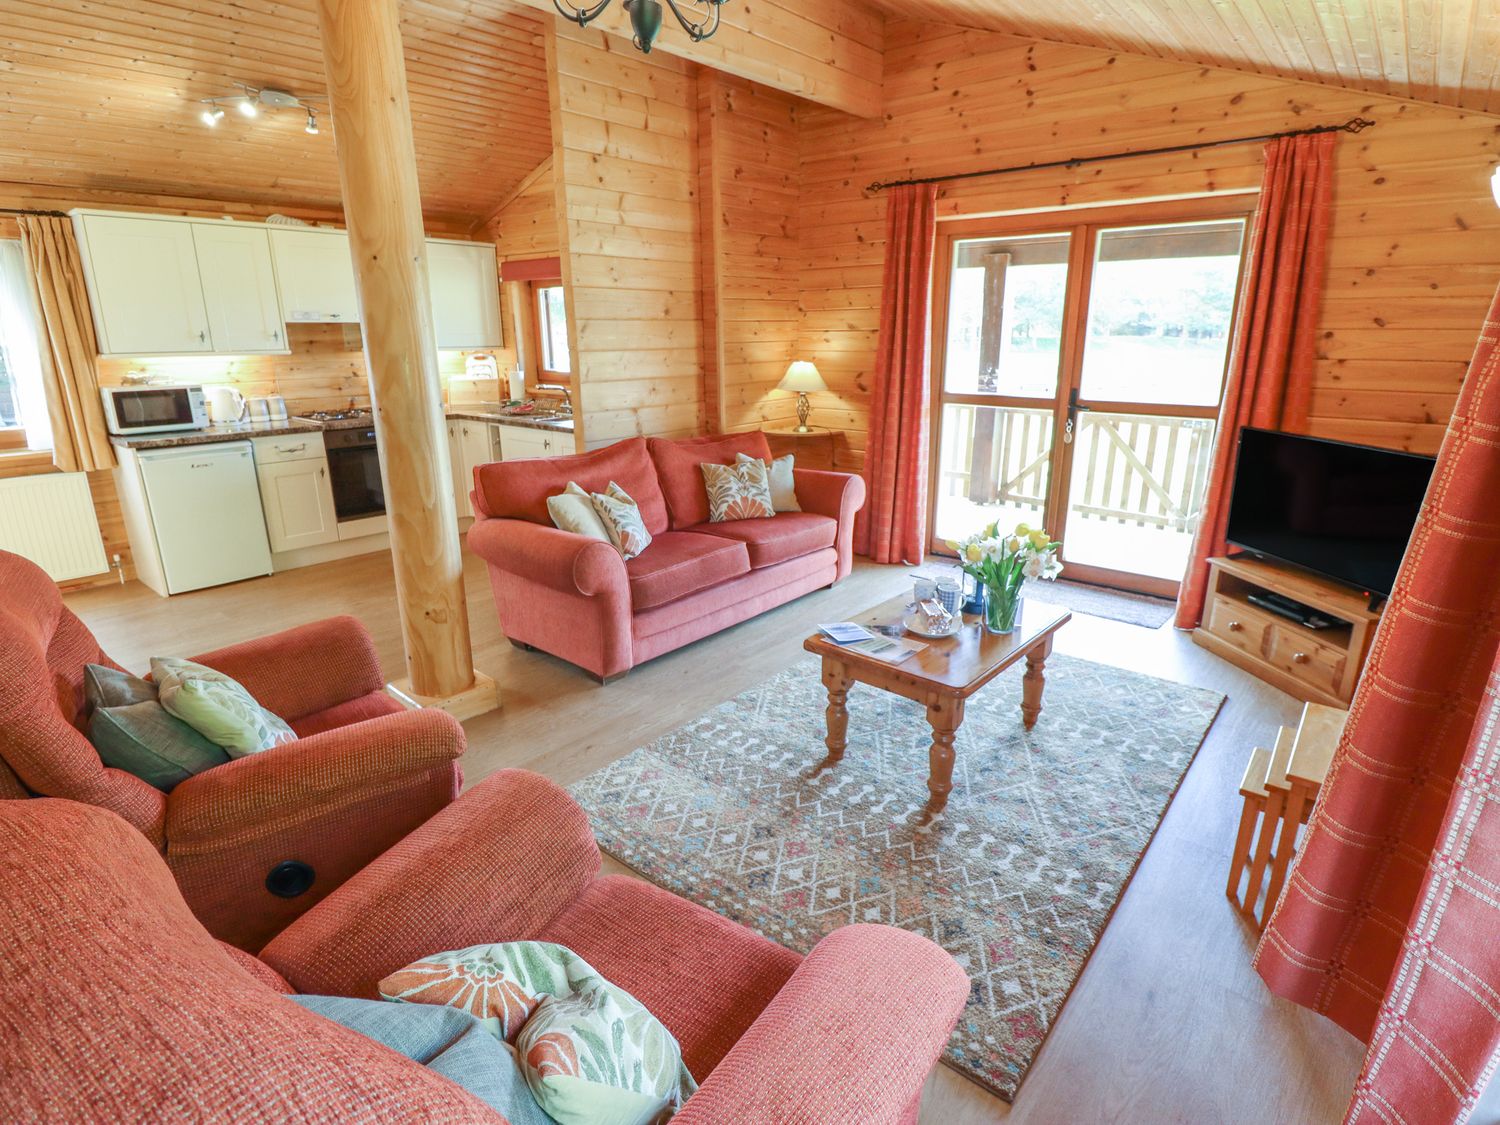 Little Owl Lodge, Bardney, open-plan, pet-friendly, hot tub, enclosed decking, wooded forest setting